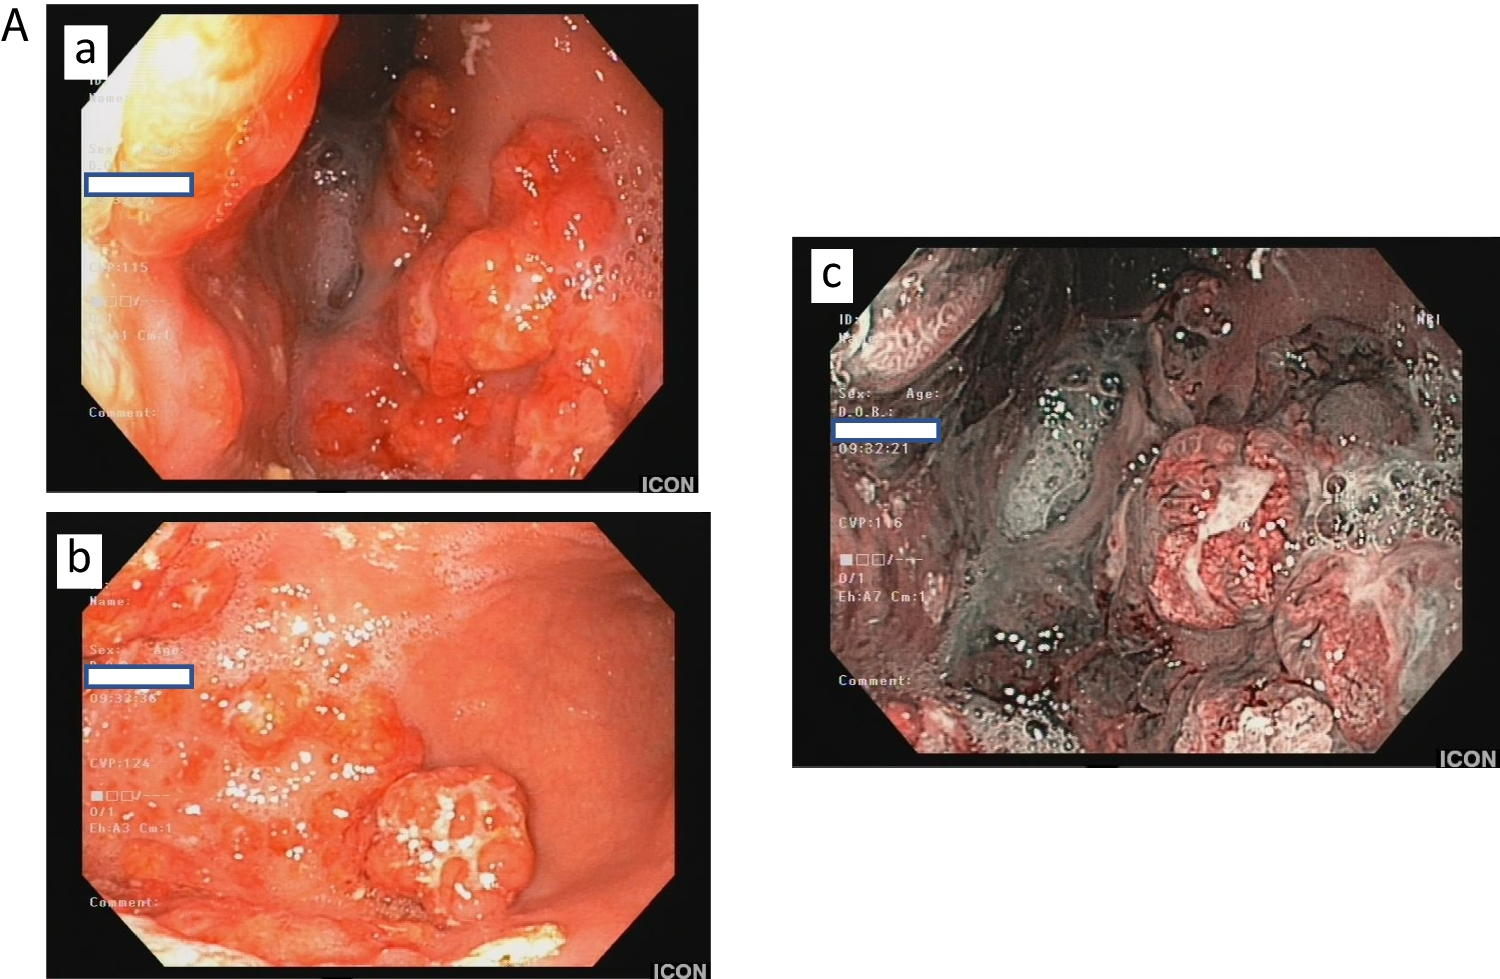 When rare diseases crisscross within the same patient: von Hippel-Lindau and type 1 gastric neuroendocrine tumor